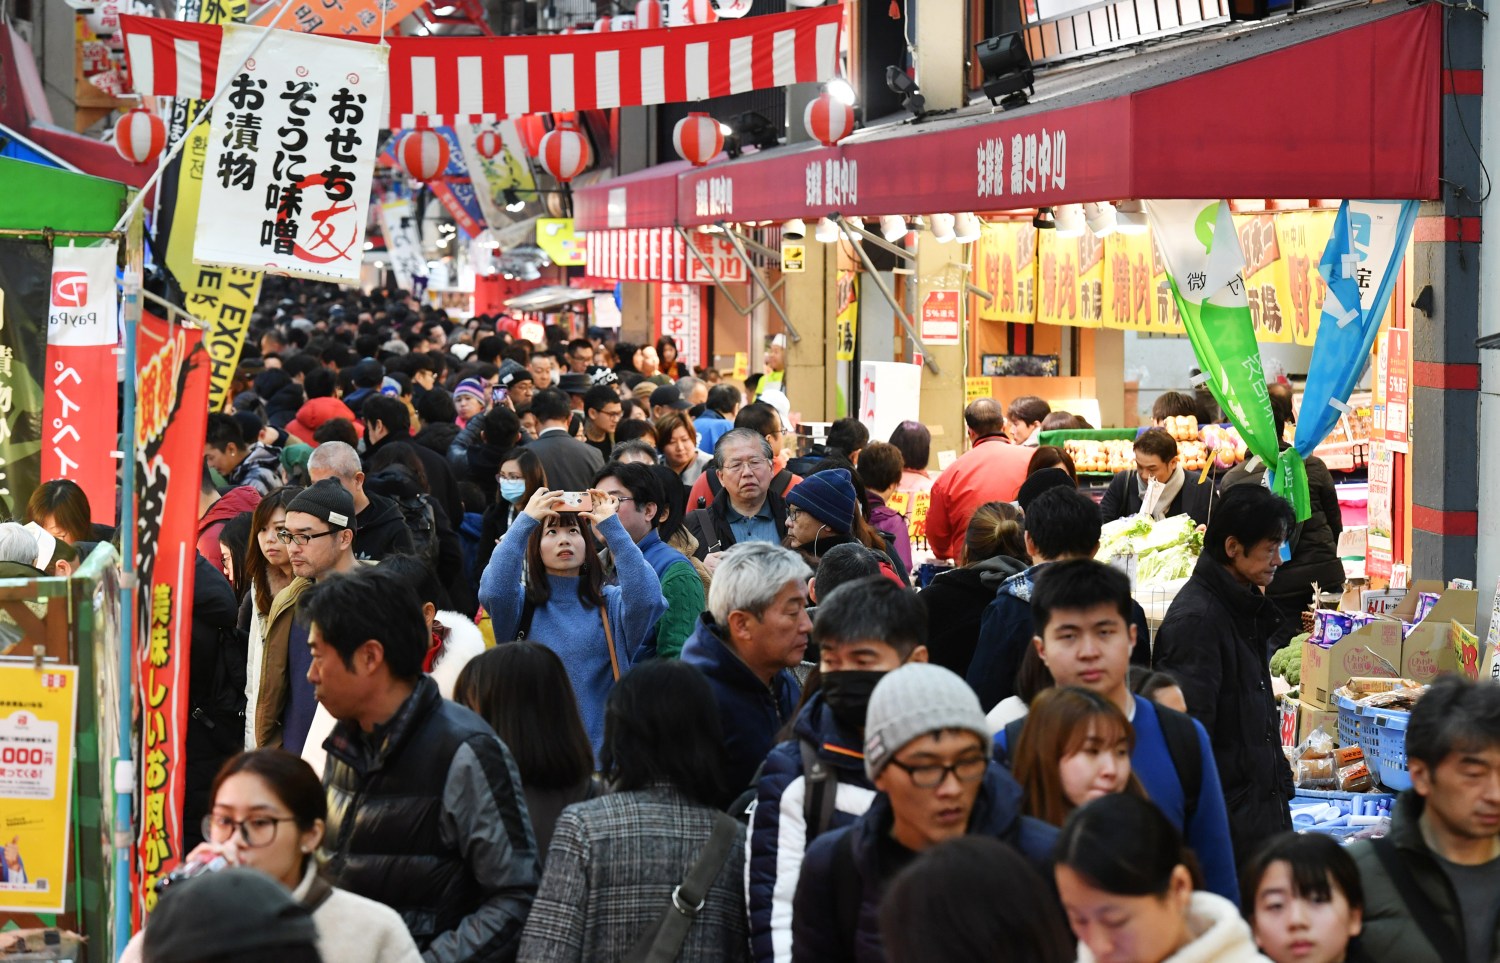 Shoppers crowd at the Kuromon Ichiba to purchase ingredients for New Year's dishes in Osaka on Dec. 30, 2019, the end of year. Shops were overflowing with marine products such as crab, tuna, meat and processed foods.   ( The Yomiuri Shimbun )